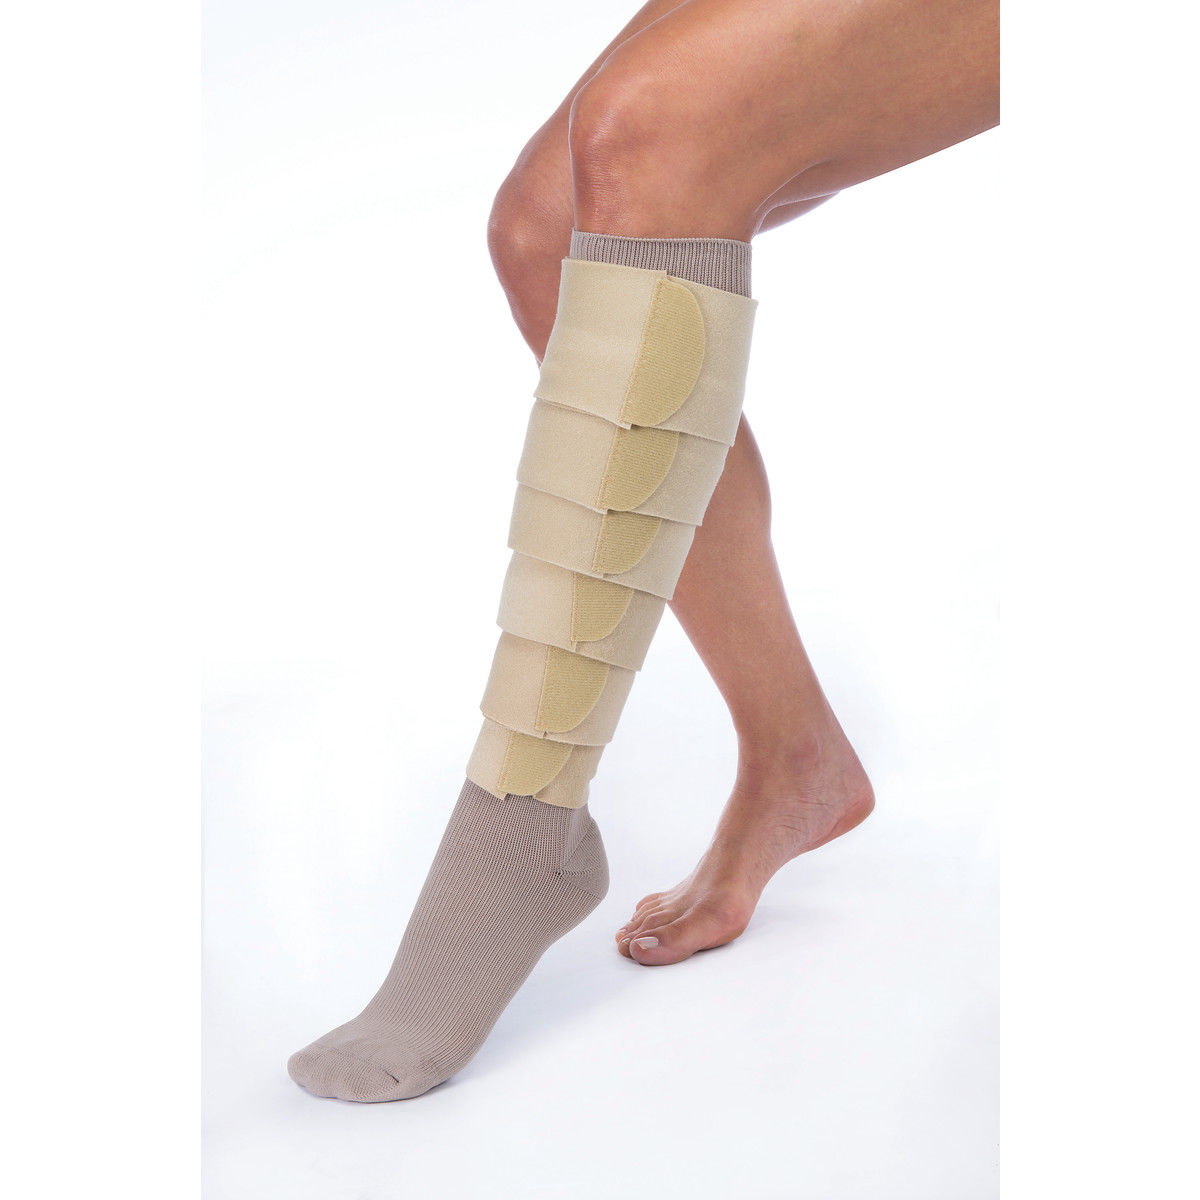 Lymphedema Products Near Me